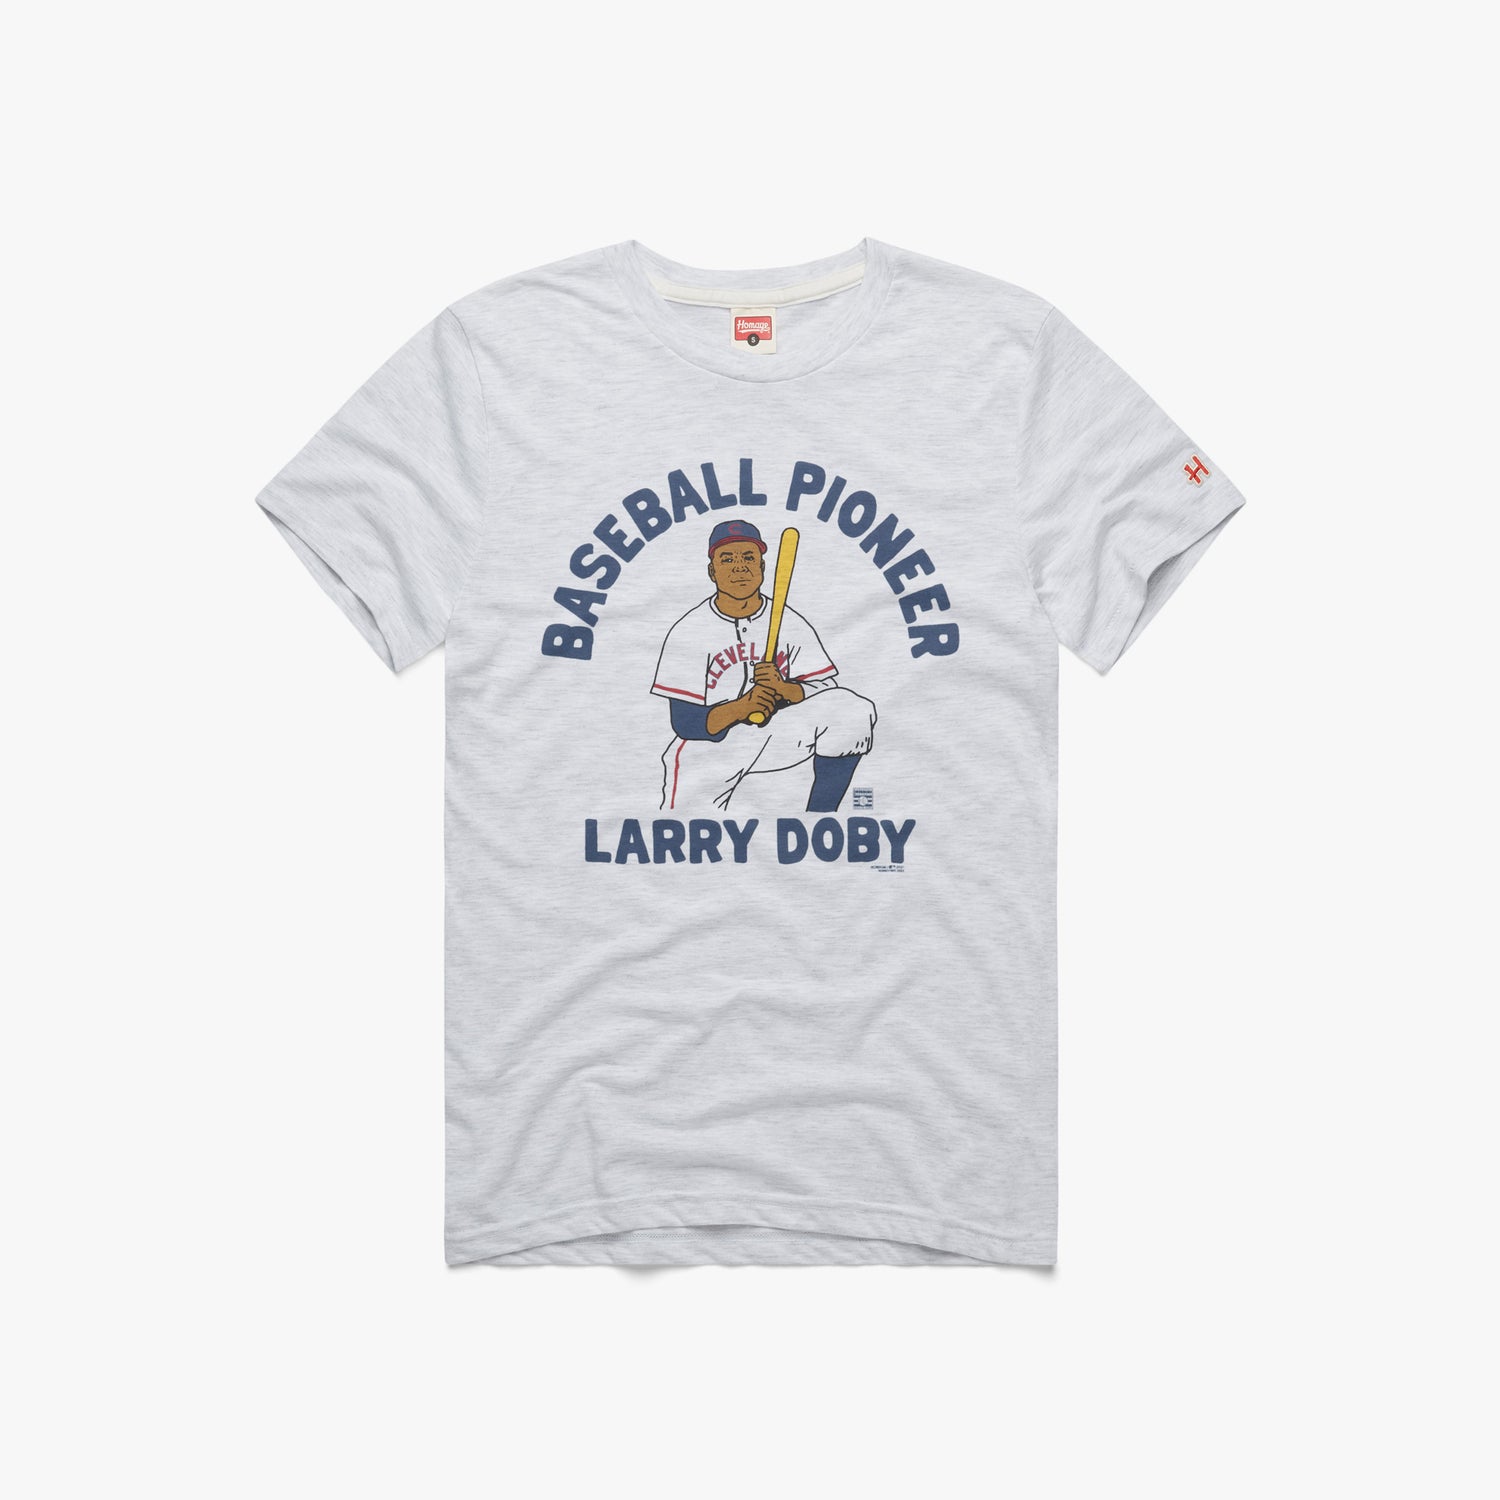 Baseball Pioneer Larry Doby Cleveland